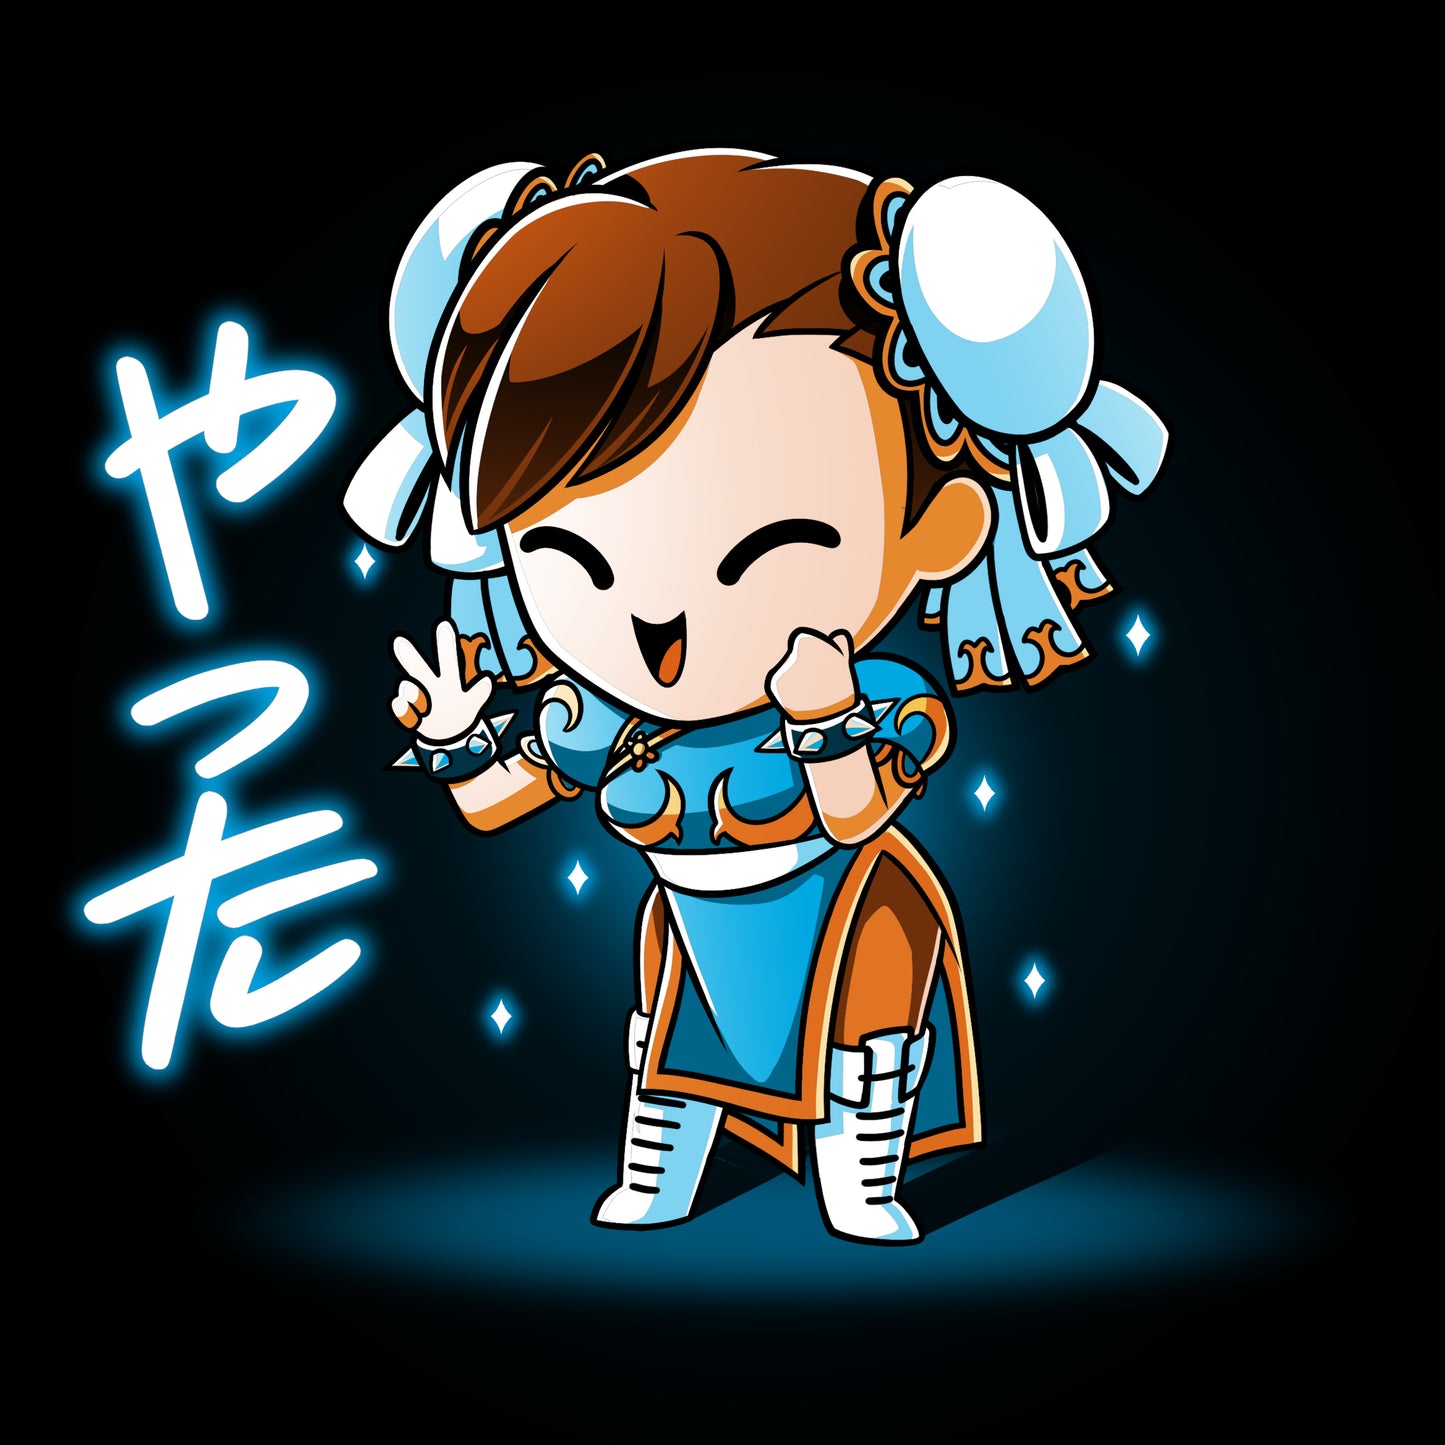 A cartoon girl in a blue outfit, resembling Chibi Chun-Li from Street Fighter, with Chinese writing, featured on a women's T-shirt by Capcom.